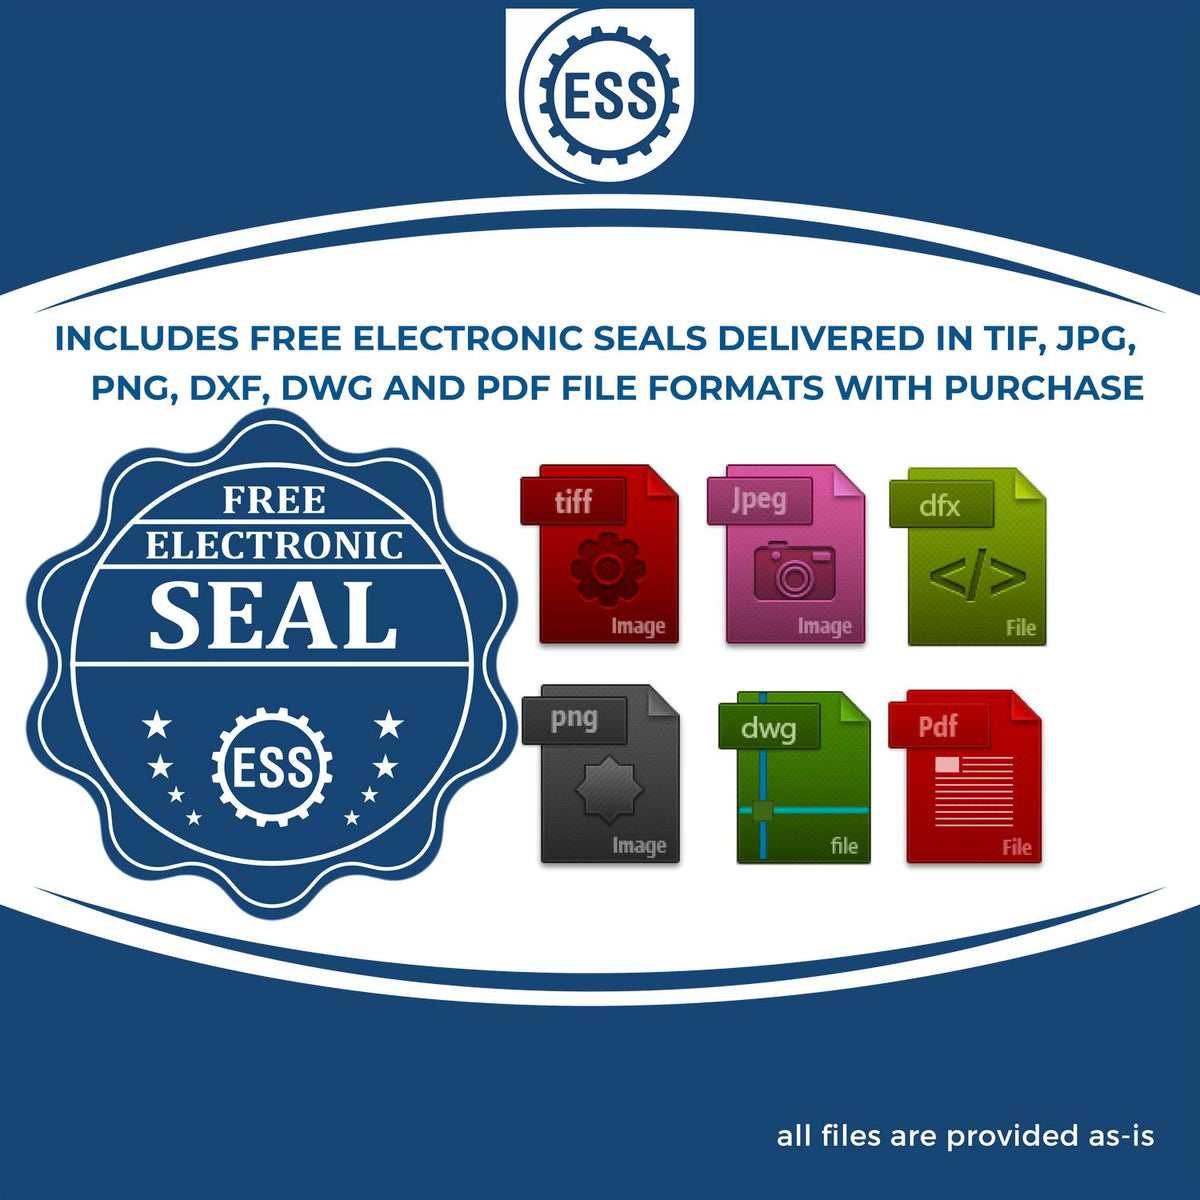 An infographic for the free electronic seal for the PSI Vermont Notary Stamp illustrating the different file type icons such as DXF, DWG, TIF, JPG and PNG.